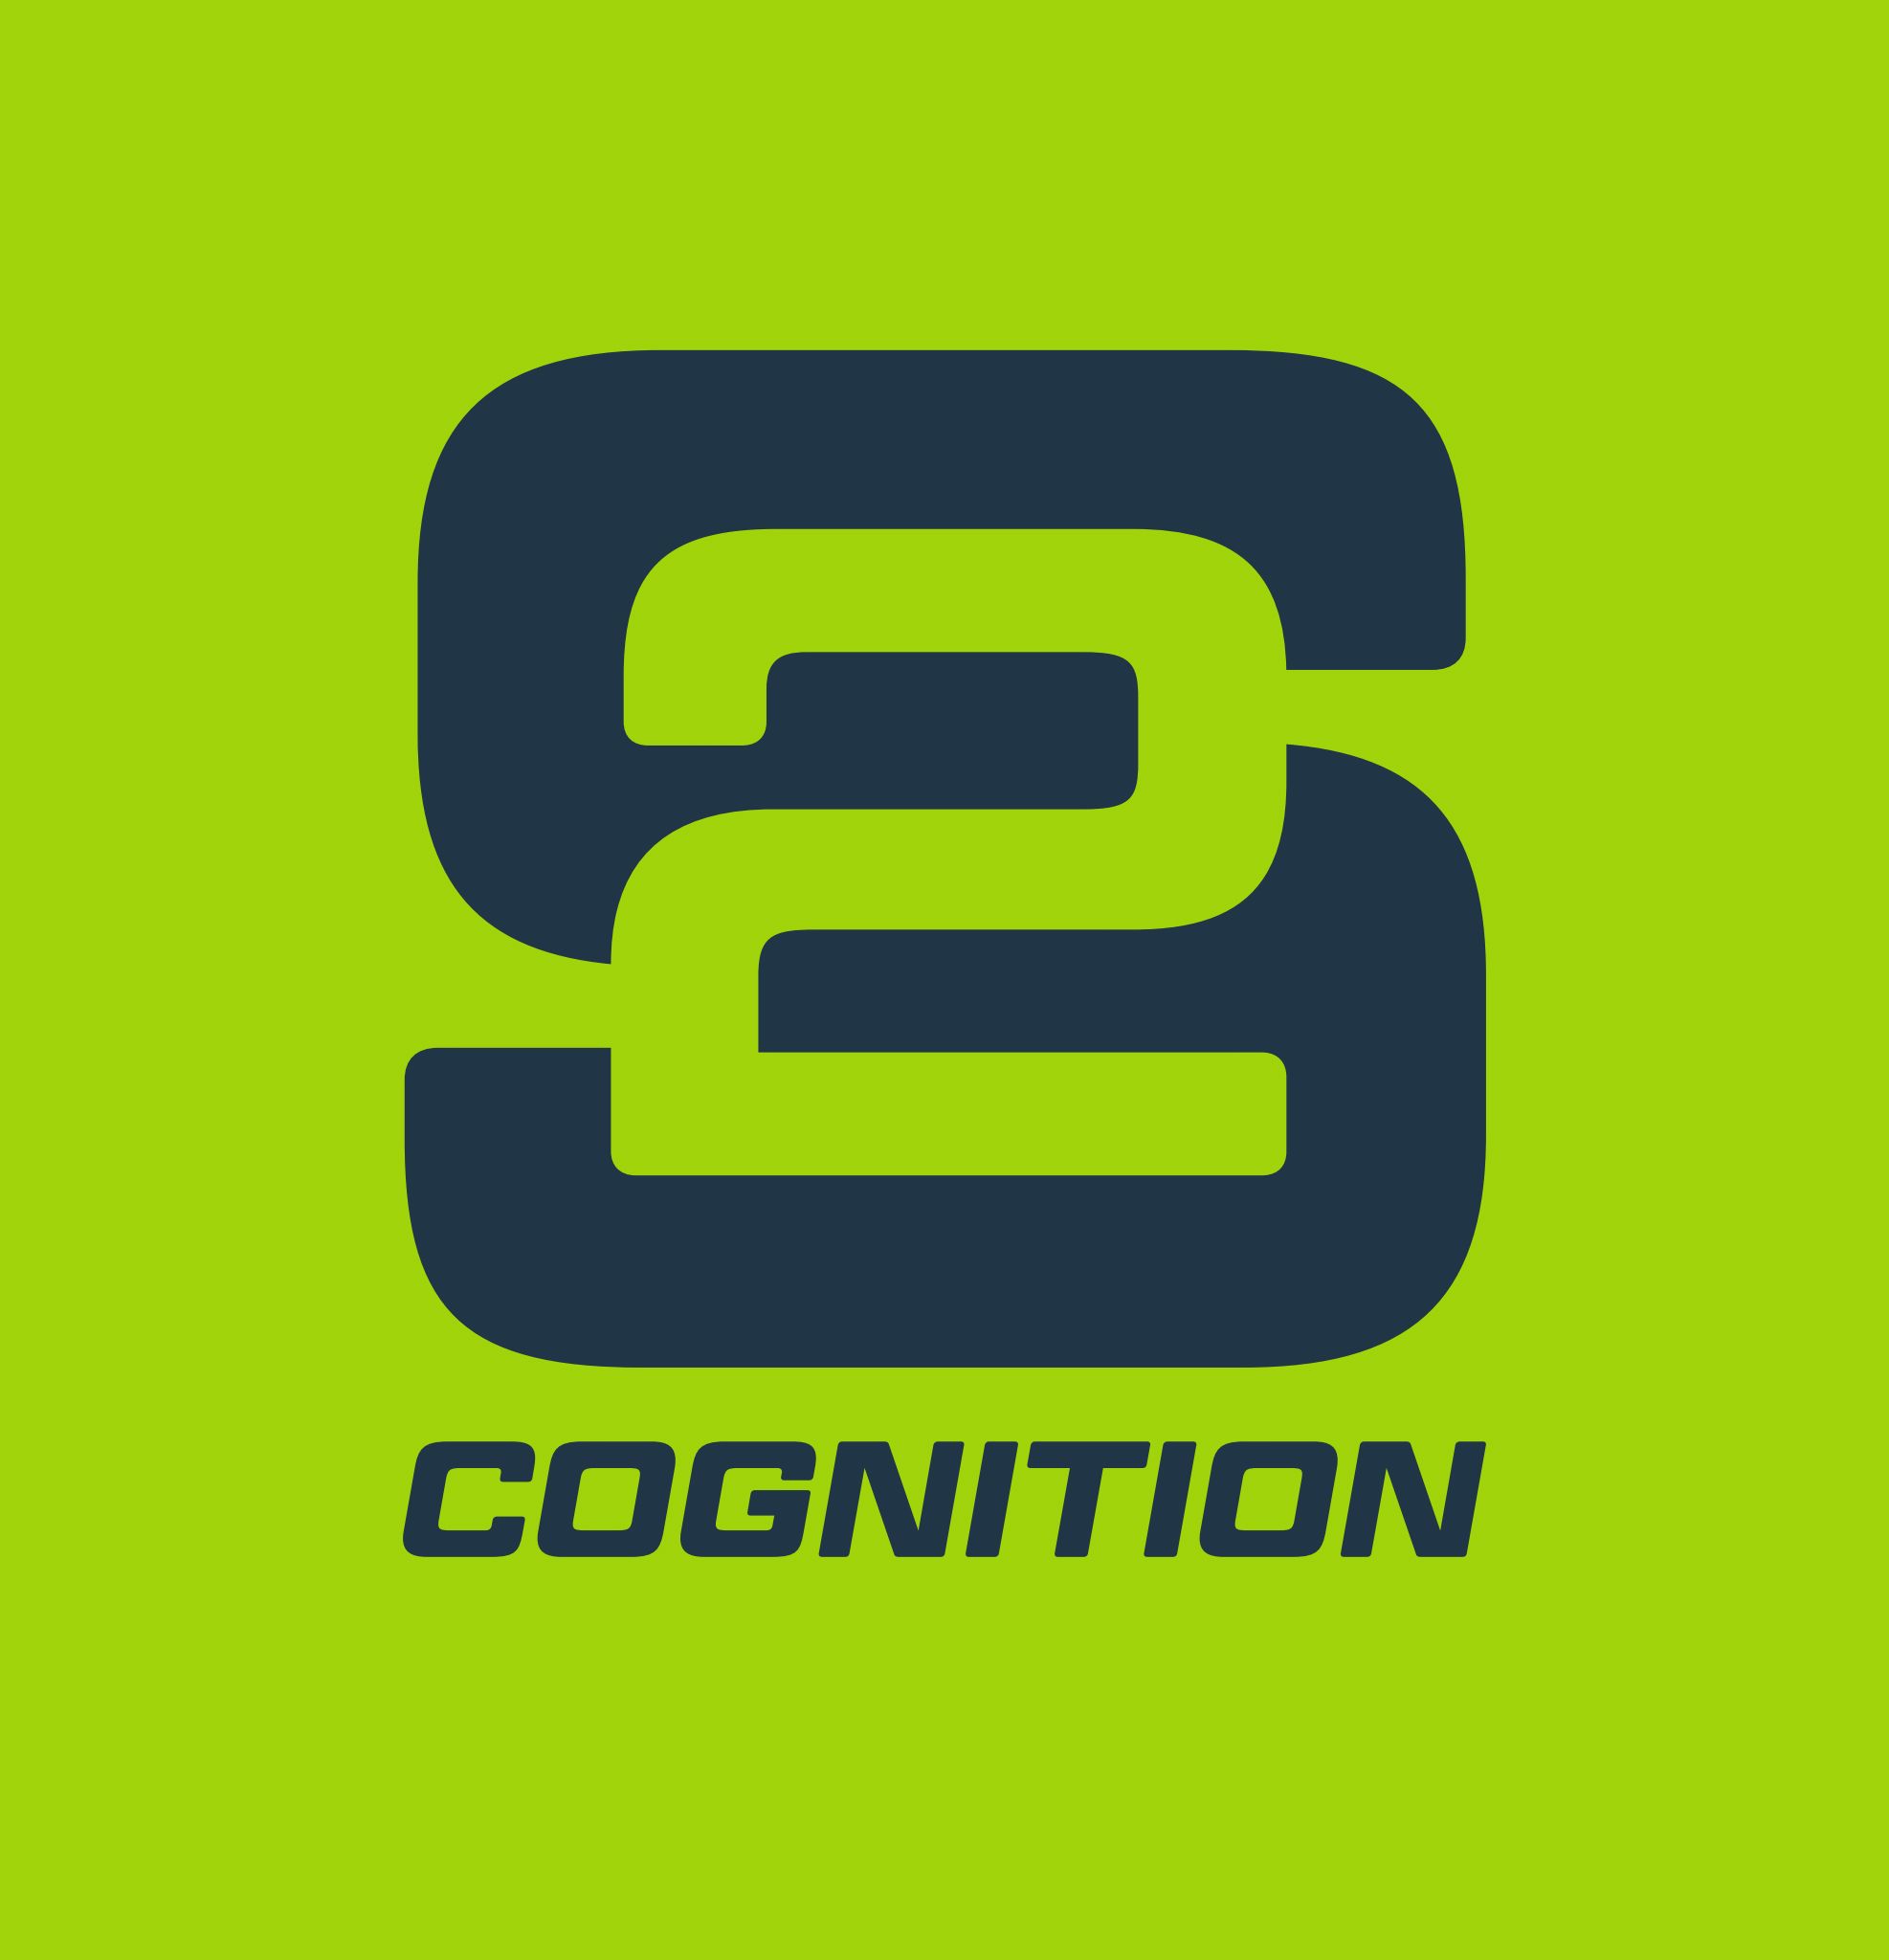 S2 Cognition, Wednesday, October 19, 2022, Press release picture